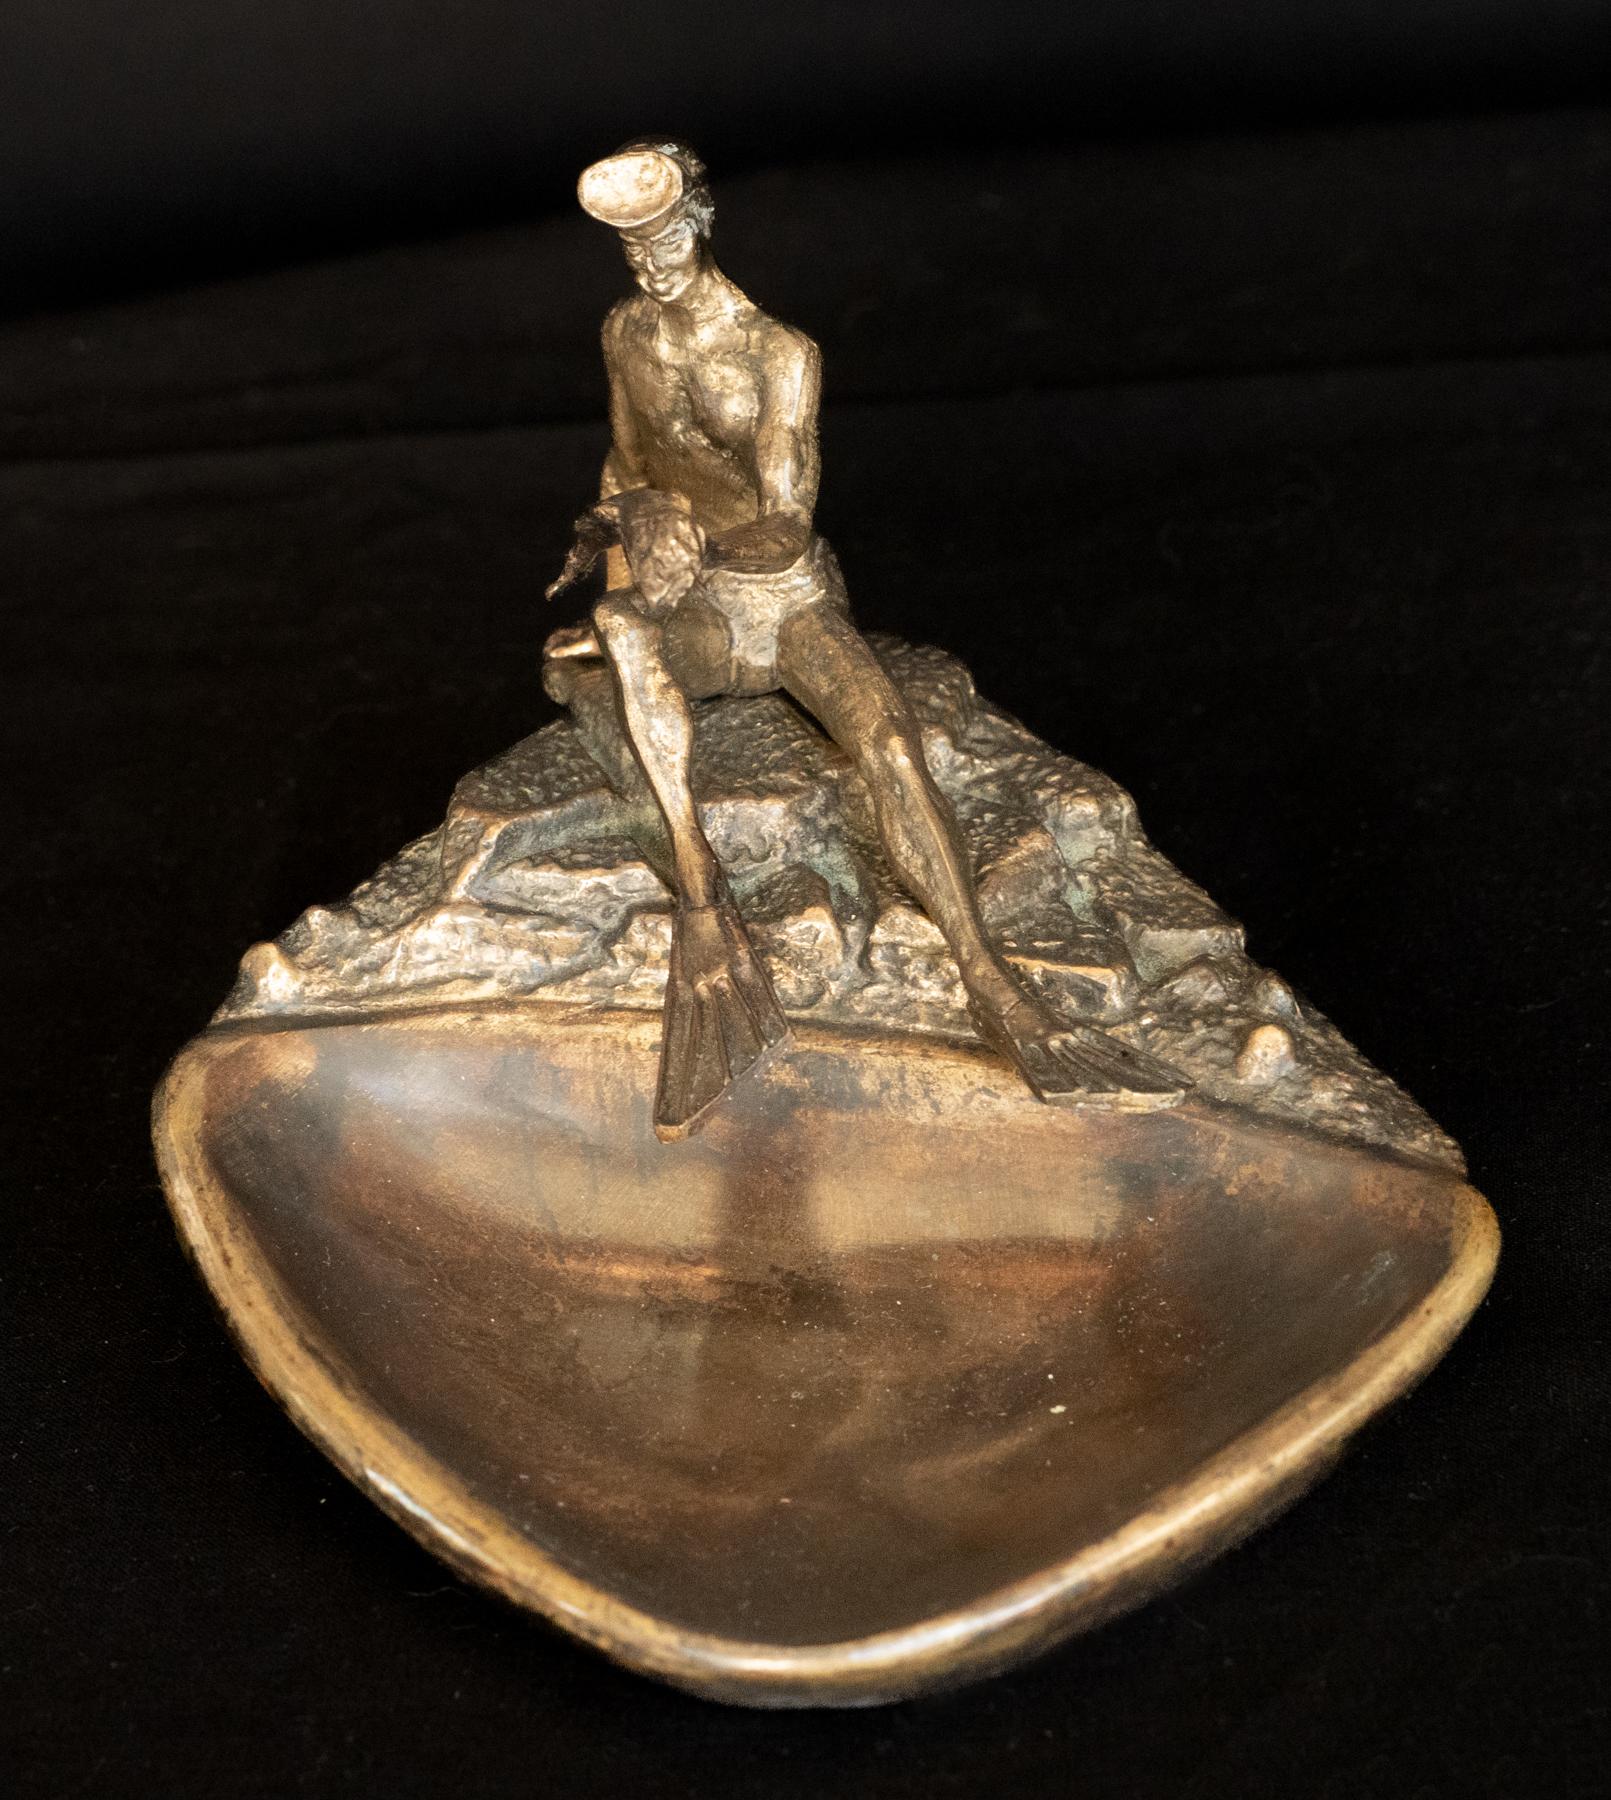 Midcentury Russian Bronze Tray with a Scuba Diver Holding a Fish. A dresser or desktop tray.